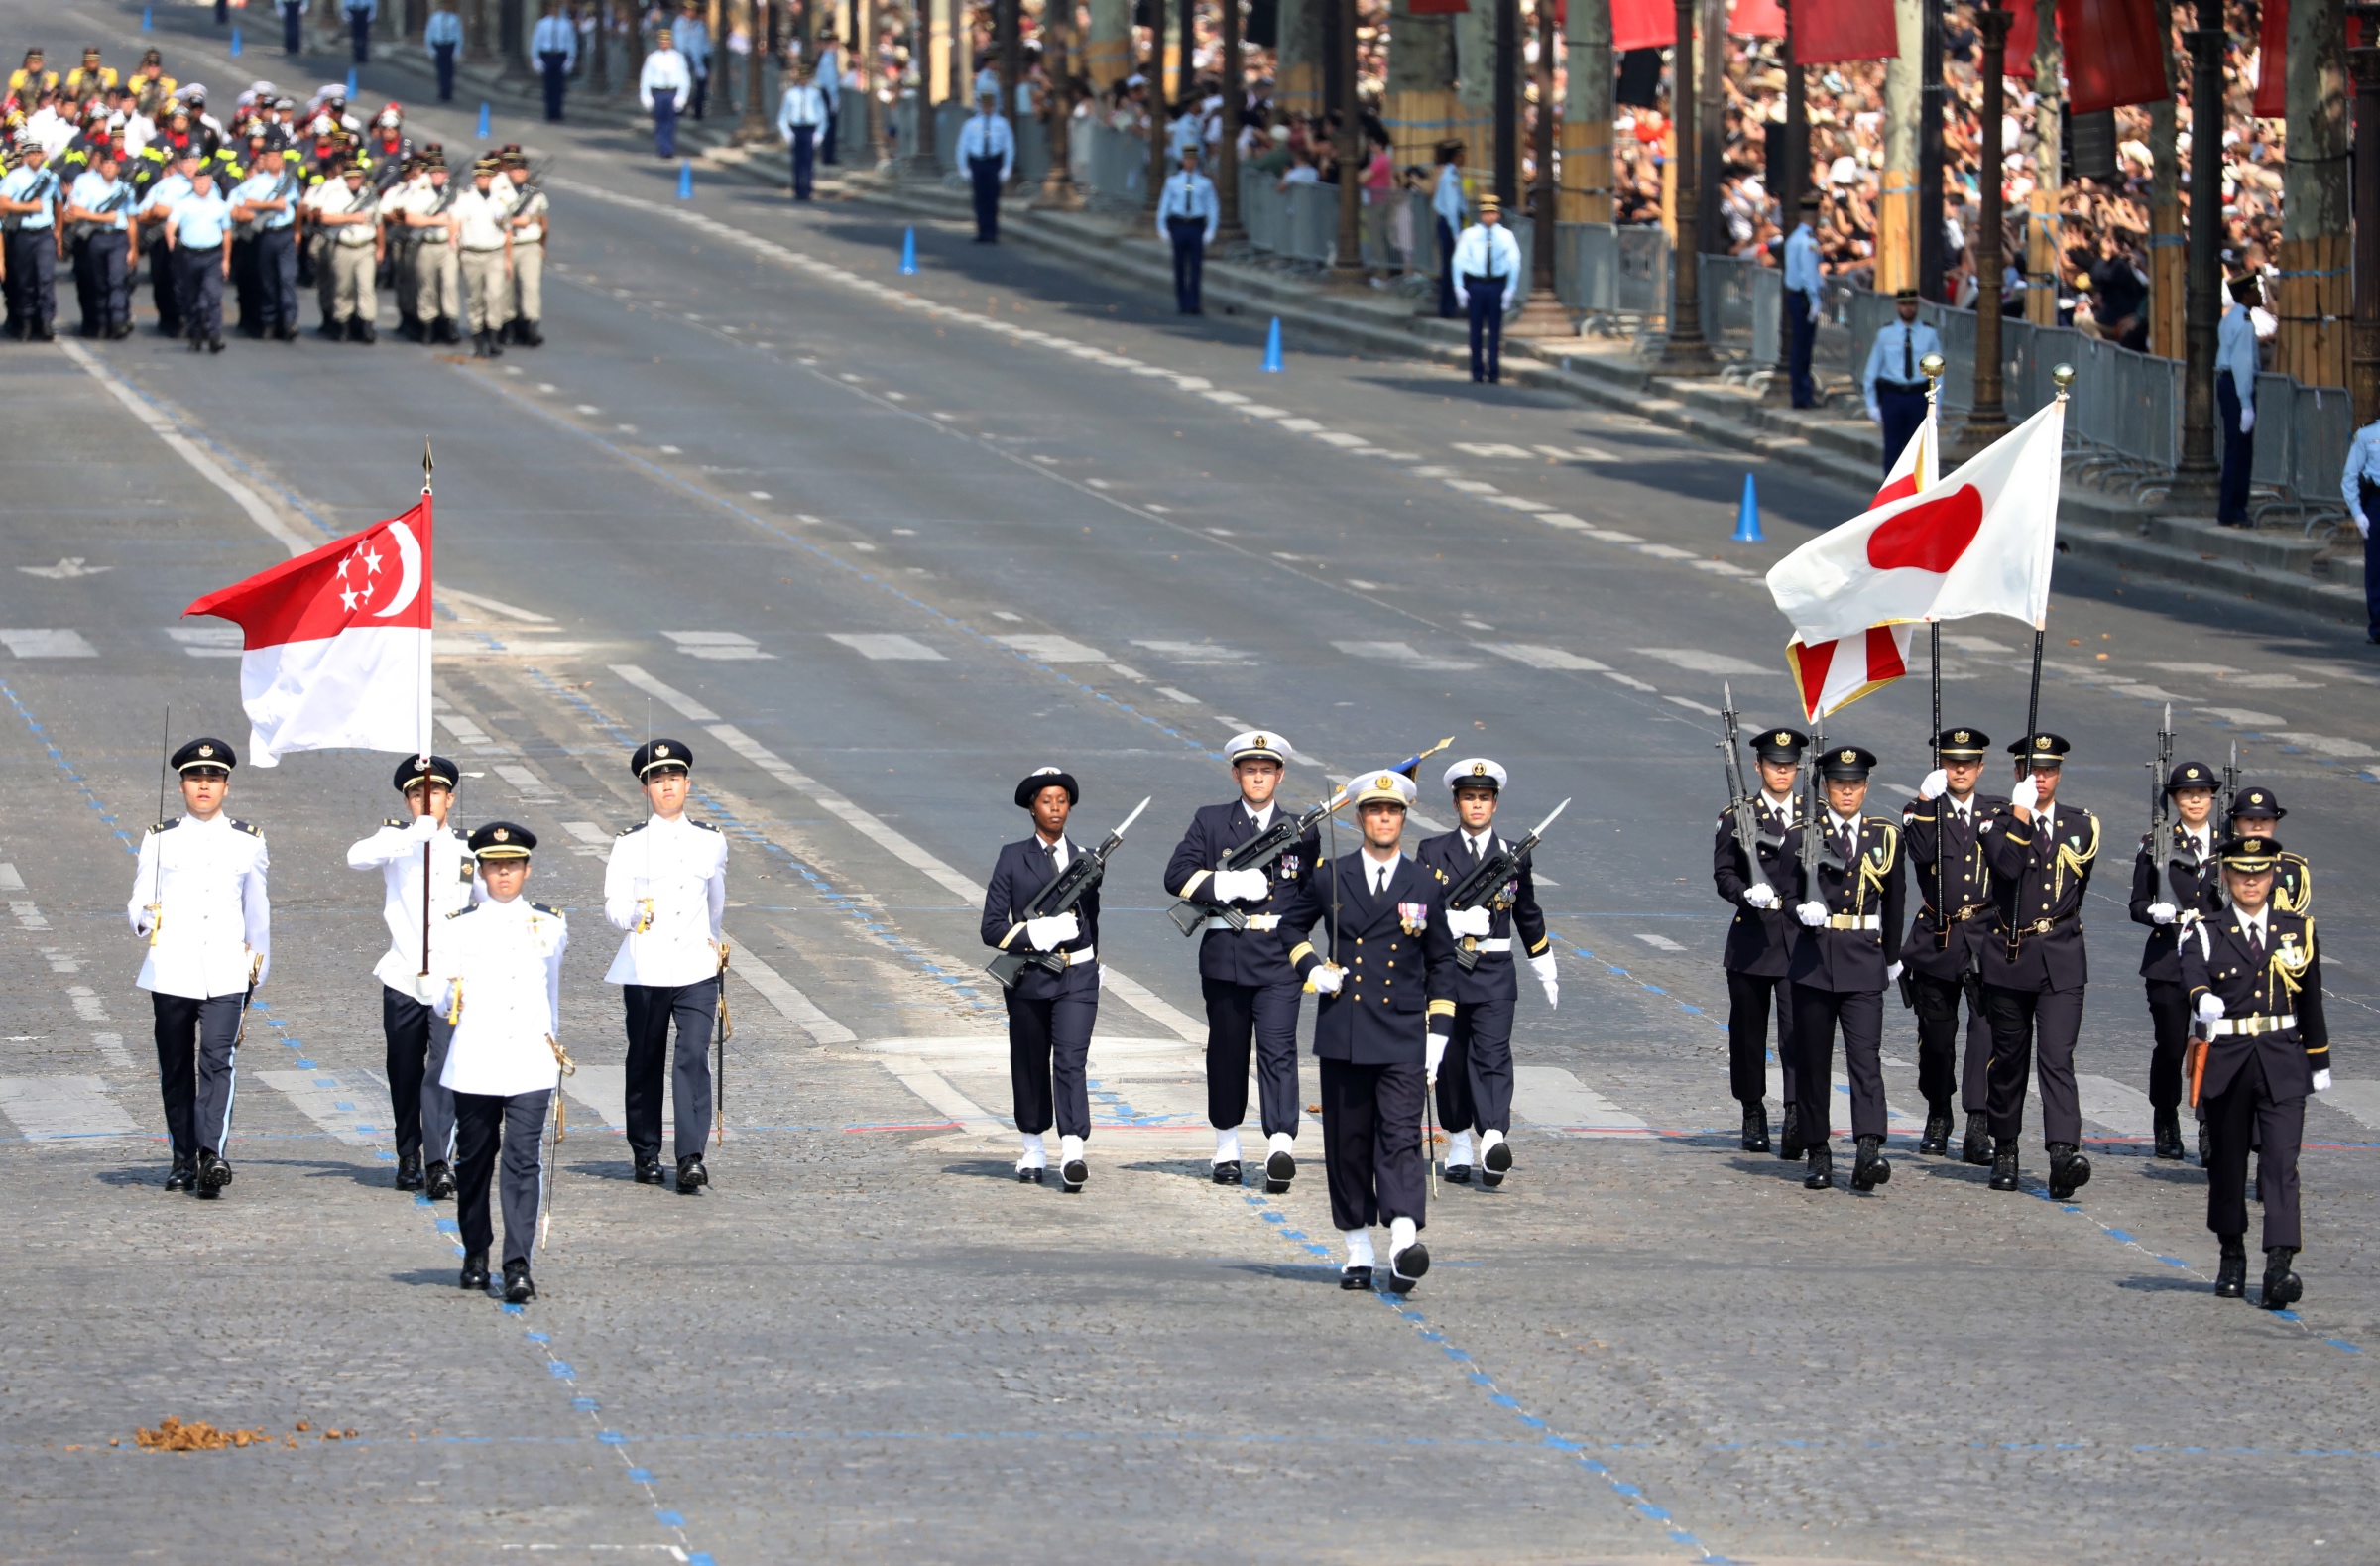 Singapore and Japan contingents in French National Day parade on 14 Jul 2018 (MCI Photo by Fyrol)